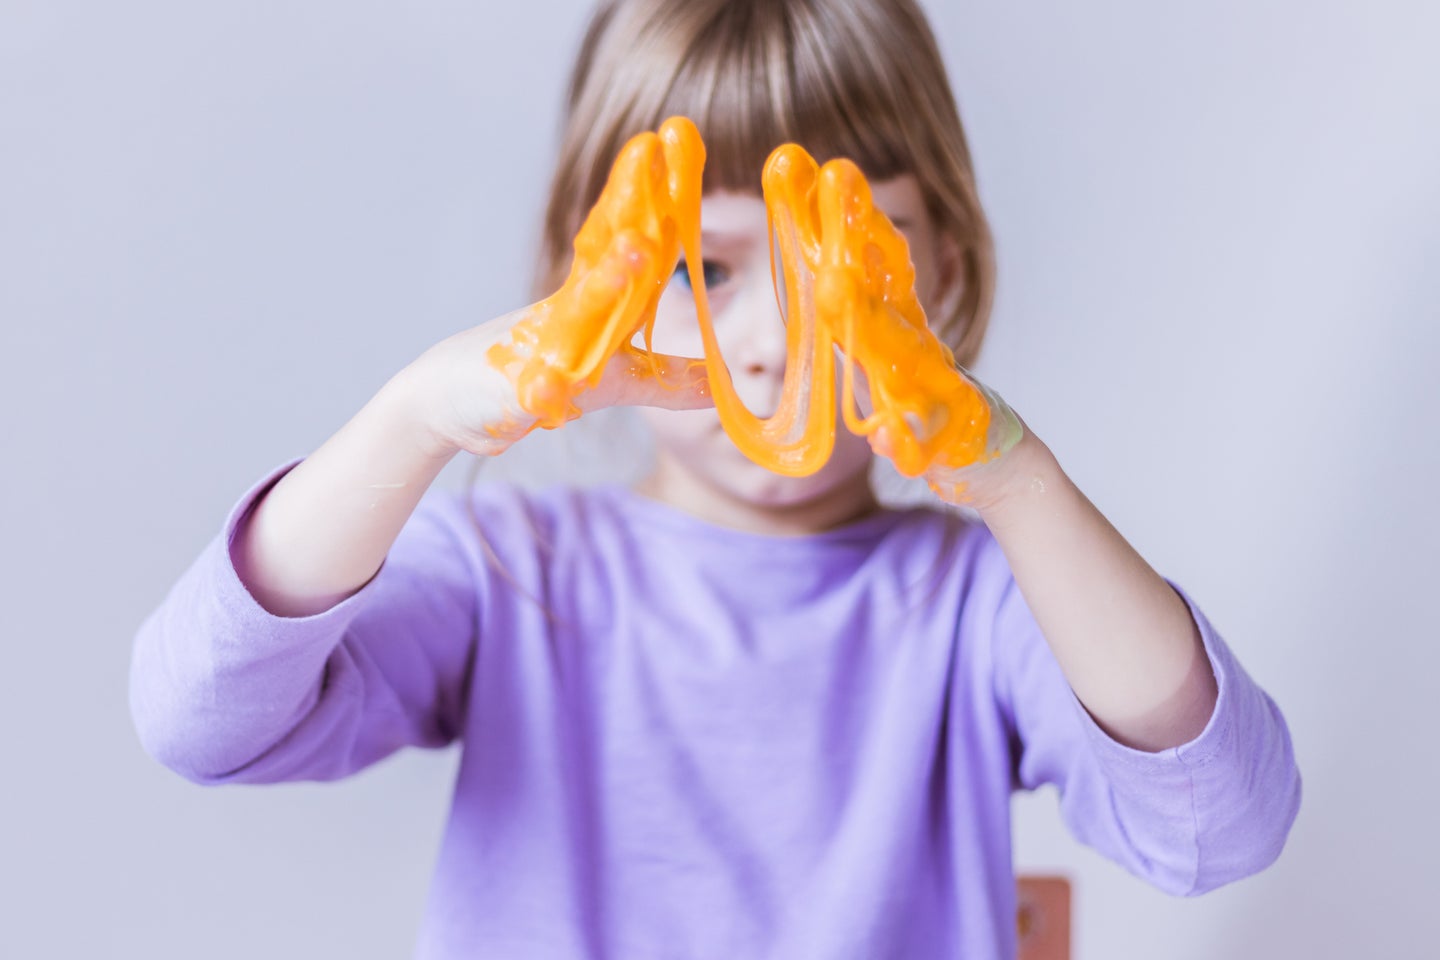 Kid in lavender shirt stretching toy orange slime out with hands